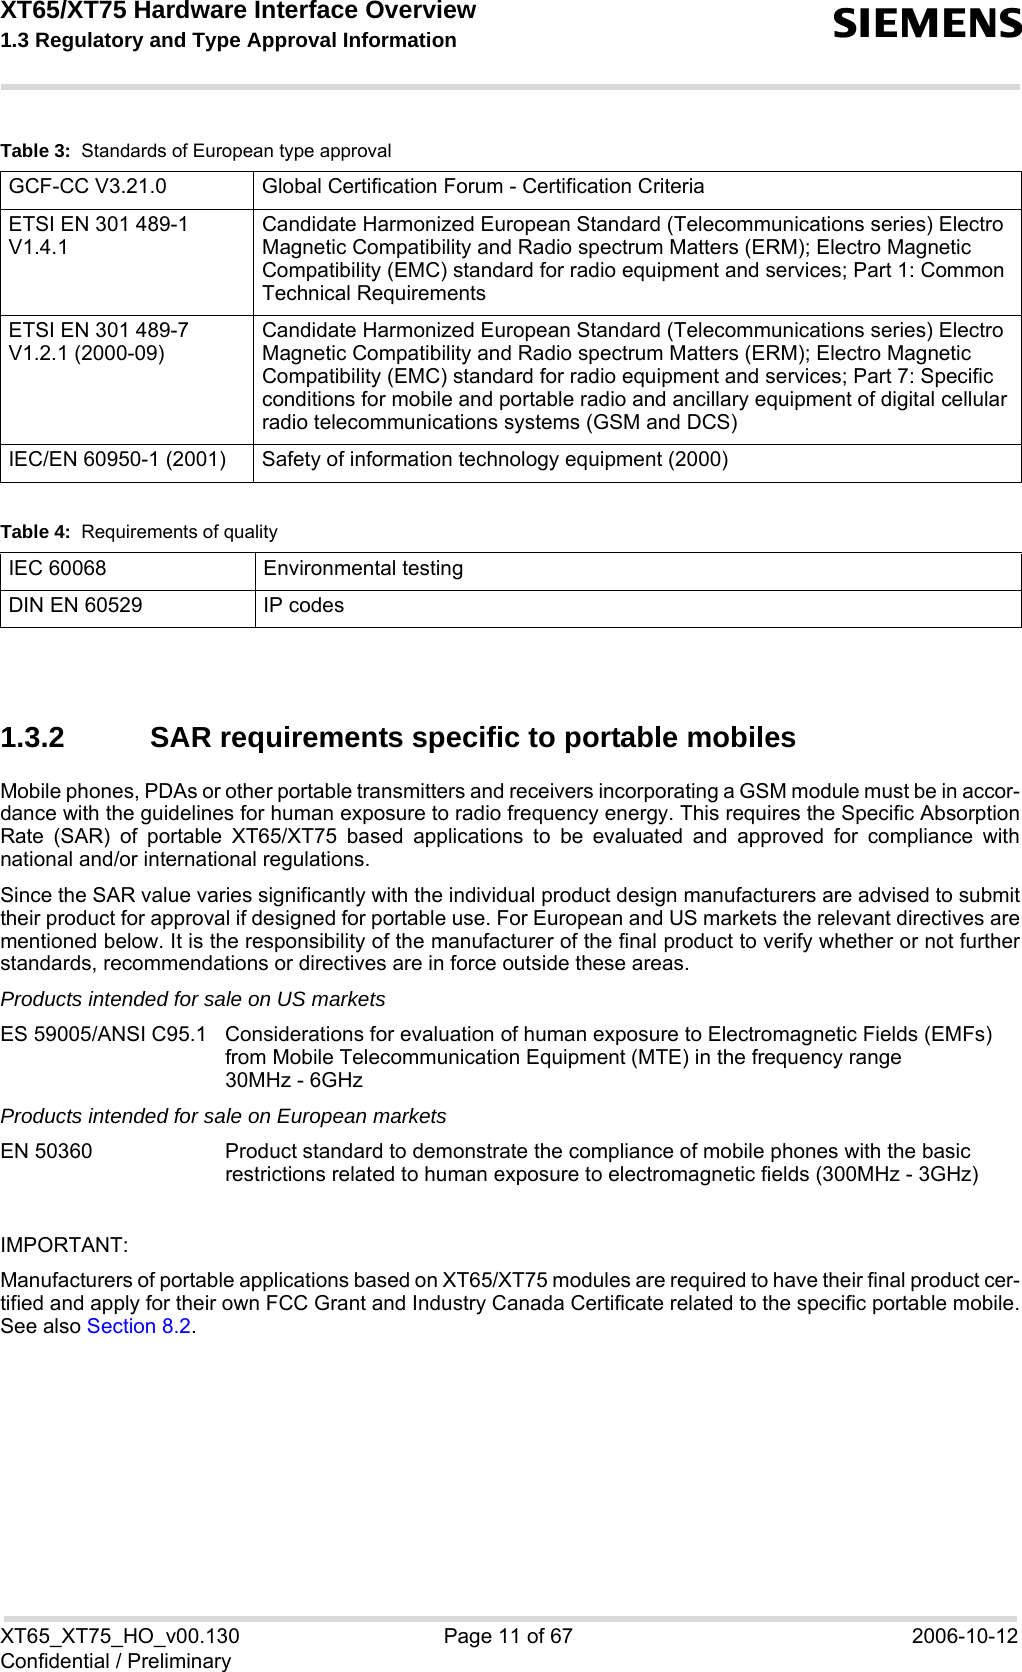 XT65/XT75 Hardware Interface Overview 1.3 Regulatory and Type Approval Information sXT65_XT75_HO_v00.130 Page 11 of 67 2006-10-12Confidential / Preliminary1.3.2 SAR requirements specific to portable mobilesMobile phones, PDAs or other portable transmitters and receivers incorporating a GSM module must be in accor-dance with the guidelines for human exposure to radio frequency energy. This requires the Specific AbsorptionRate (SAR) of portable XT65/XT75 based applications to be evaluated and approved for compliance withnational and/or international regulations. Since the SAR value varies significantly with the individual product design manufacturers are advised to submittheir product for approval if designed for portable use. For European and US markets the relevant directives arementioned below. It is the responsibility of the manufacturer of the final product to verify whether or not furtherstandards, recommendations or directives are in force outside these areas. Products intended for sale on US marketsES 59005/ANSI C95.1 Considerations for evaluation of human exposure to Electromagnetic Fields (EMFs)from Mobile Telecommunication Equipment (MTE) in the frequency range 30MHz - 6GHz Products intended for sale on European marketsEN 50360 Product standard to demonstrate the compliance of mobile phones with the basicrestrictions related to human exposure to electromagnetic fields (300MHz - 3GHz)IMPORTANT:Manufacturers of portable applications based on XT65/XT75 modules are required to have their final product cer-tified and apply for their own FCC Grant and Industry Canada Certificate related to the specific portable mobile.See also Section 8.2.GCF-CC V3.21.0  Global Certification Forum - Certification CriteriaETSI EN 301 489-1 V1.4.1Candidate Harmonized European Standard (Telecommunications series) Electro Magnetic Compatibility and Radio spectrum Matters (ERM); Electro Magnetic Compatibility (EMC) standard for radio equipment and services; Part 1: Common Technical RequirementsETSI EN 301 489-7 V1.2.1 (2000-09)Candidate Harmonized European Standard (Telecommunications series) Electro Magnetic Compatibility and Radio spectrum Matters (ERM); Electro Magnetic Compatibility (EMC) standard for radio equipment and services; Part 7: Specific conditions for mobile and portable radio and ancillary equipment of digital cellular radio telecommunications systems (GSM and DCS)IEC/EN 60950-1 (2001) Safety of information technology equipment (2000)Table 4:  Requirements of qualityIEC 60068 Environmental testingDIN EN 60529 IP codesTable 3:  Standards of European type approval